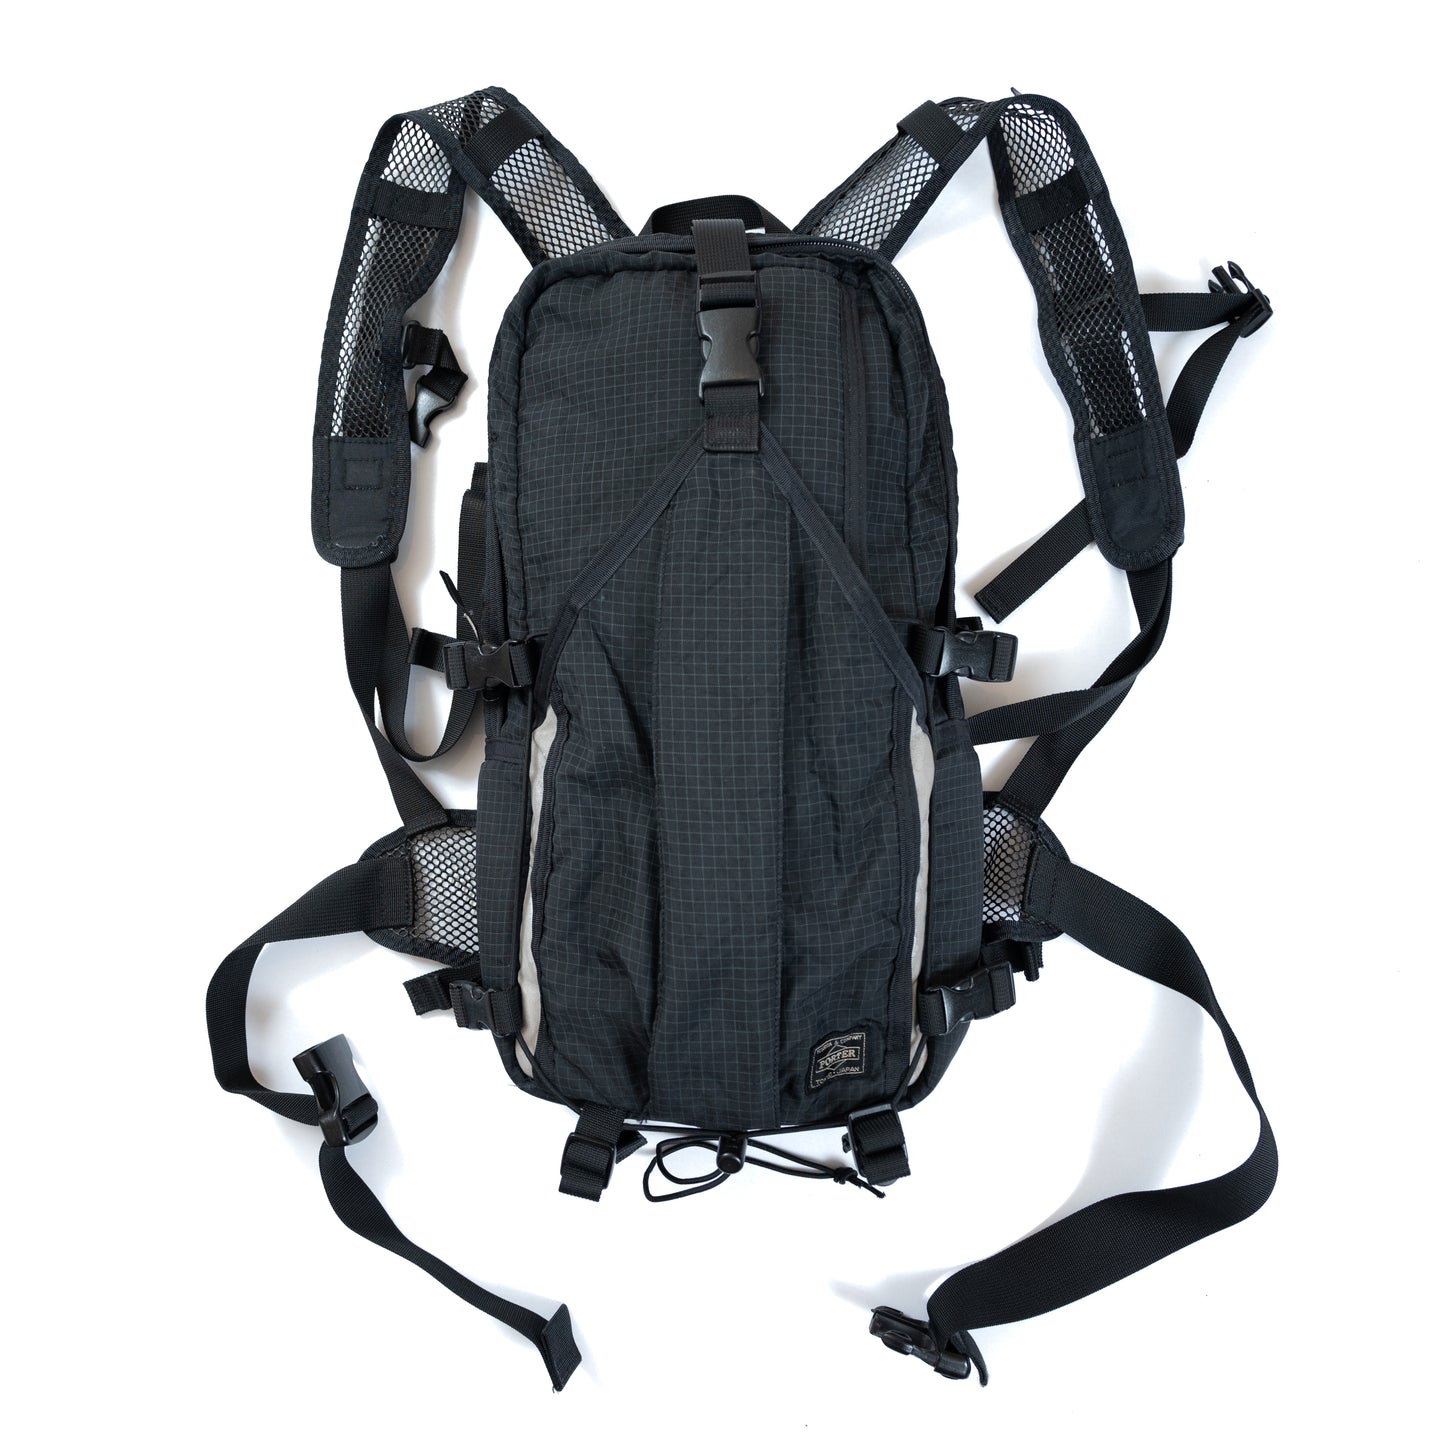 Porter 3M Nylon Ripstop Cycling Backpack